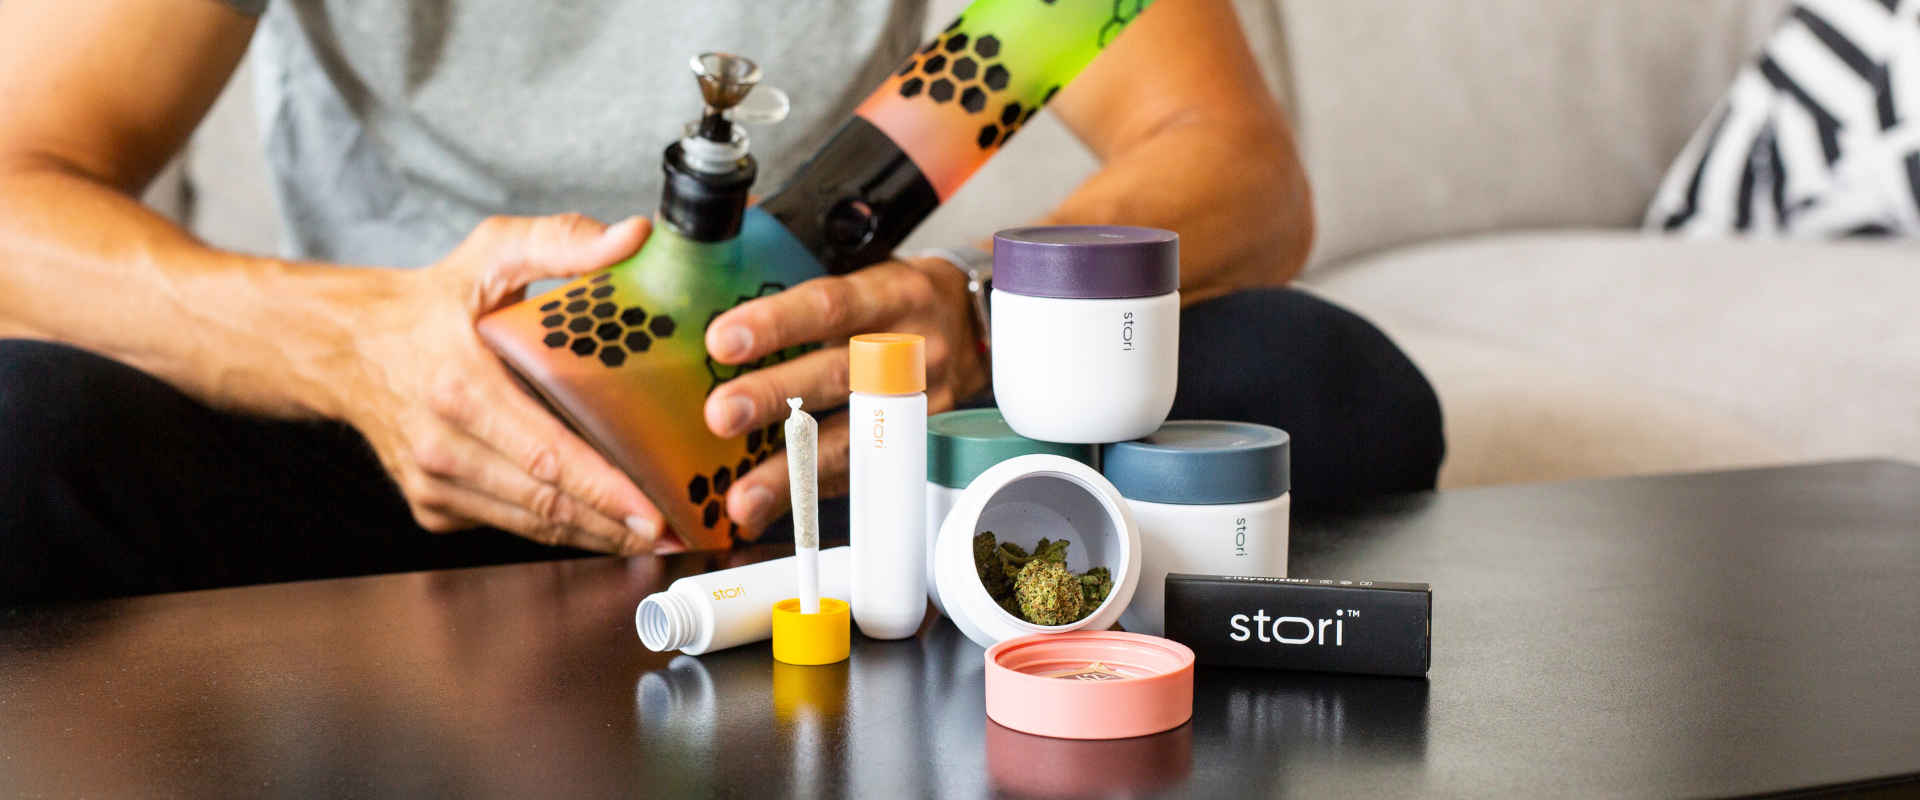 Weed Gifts for Stoners